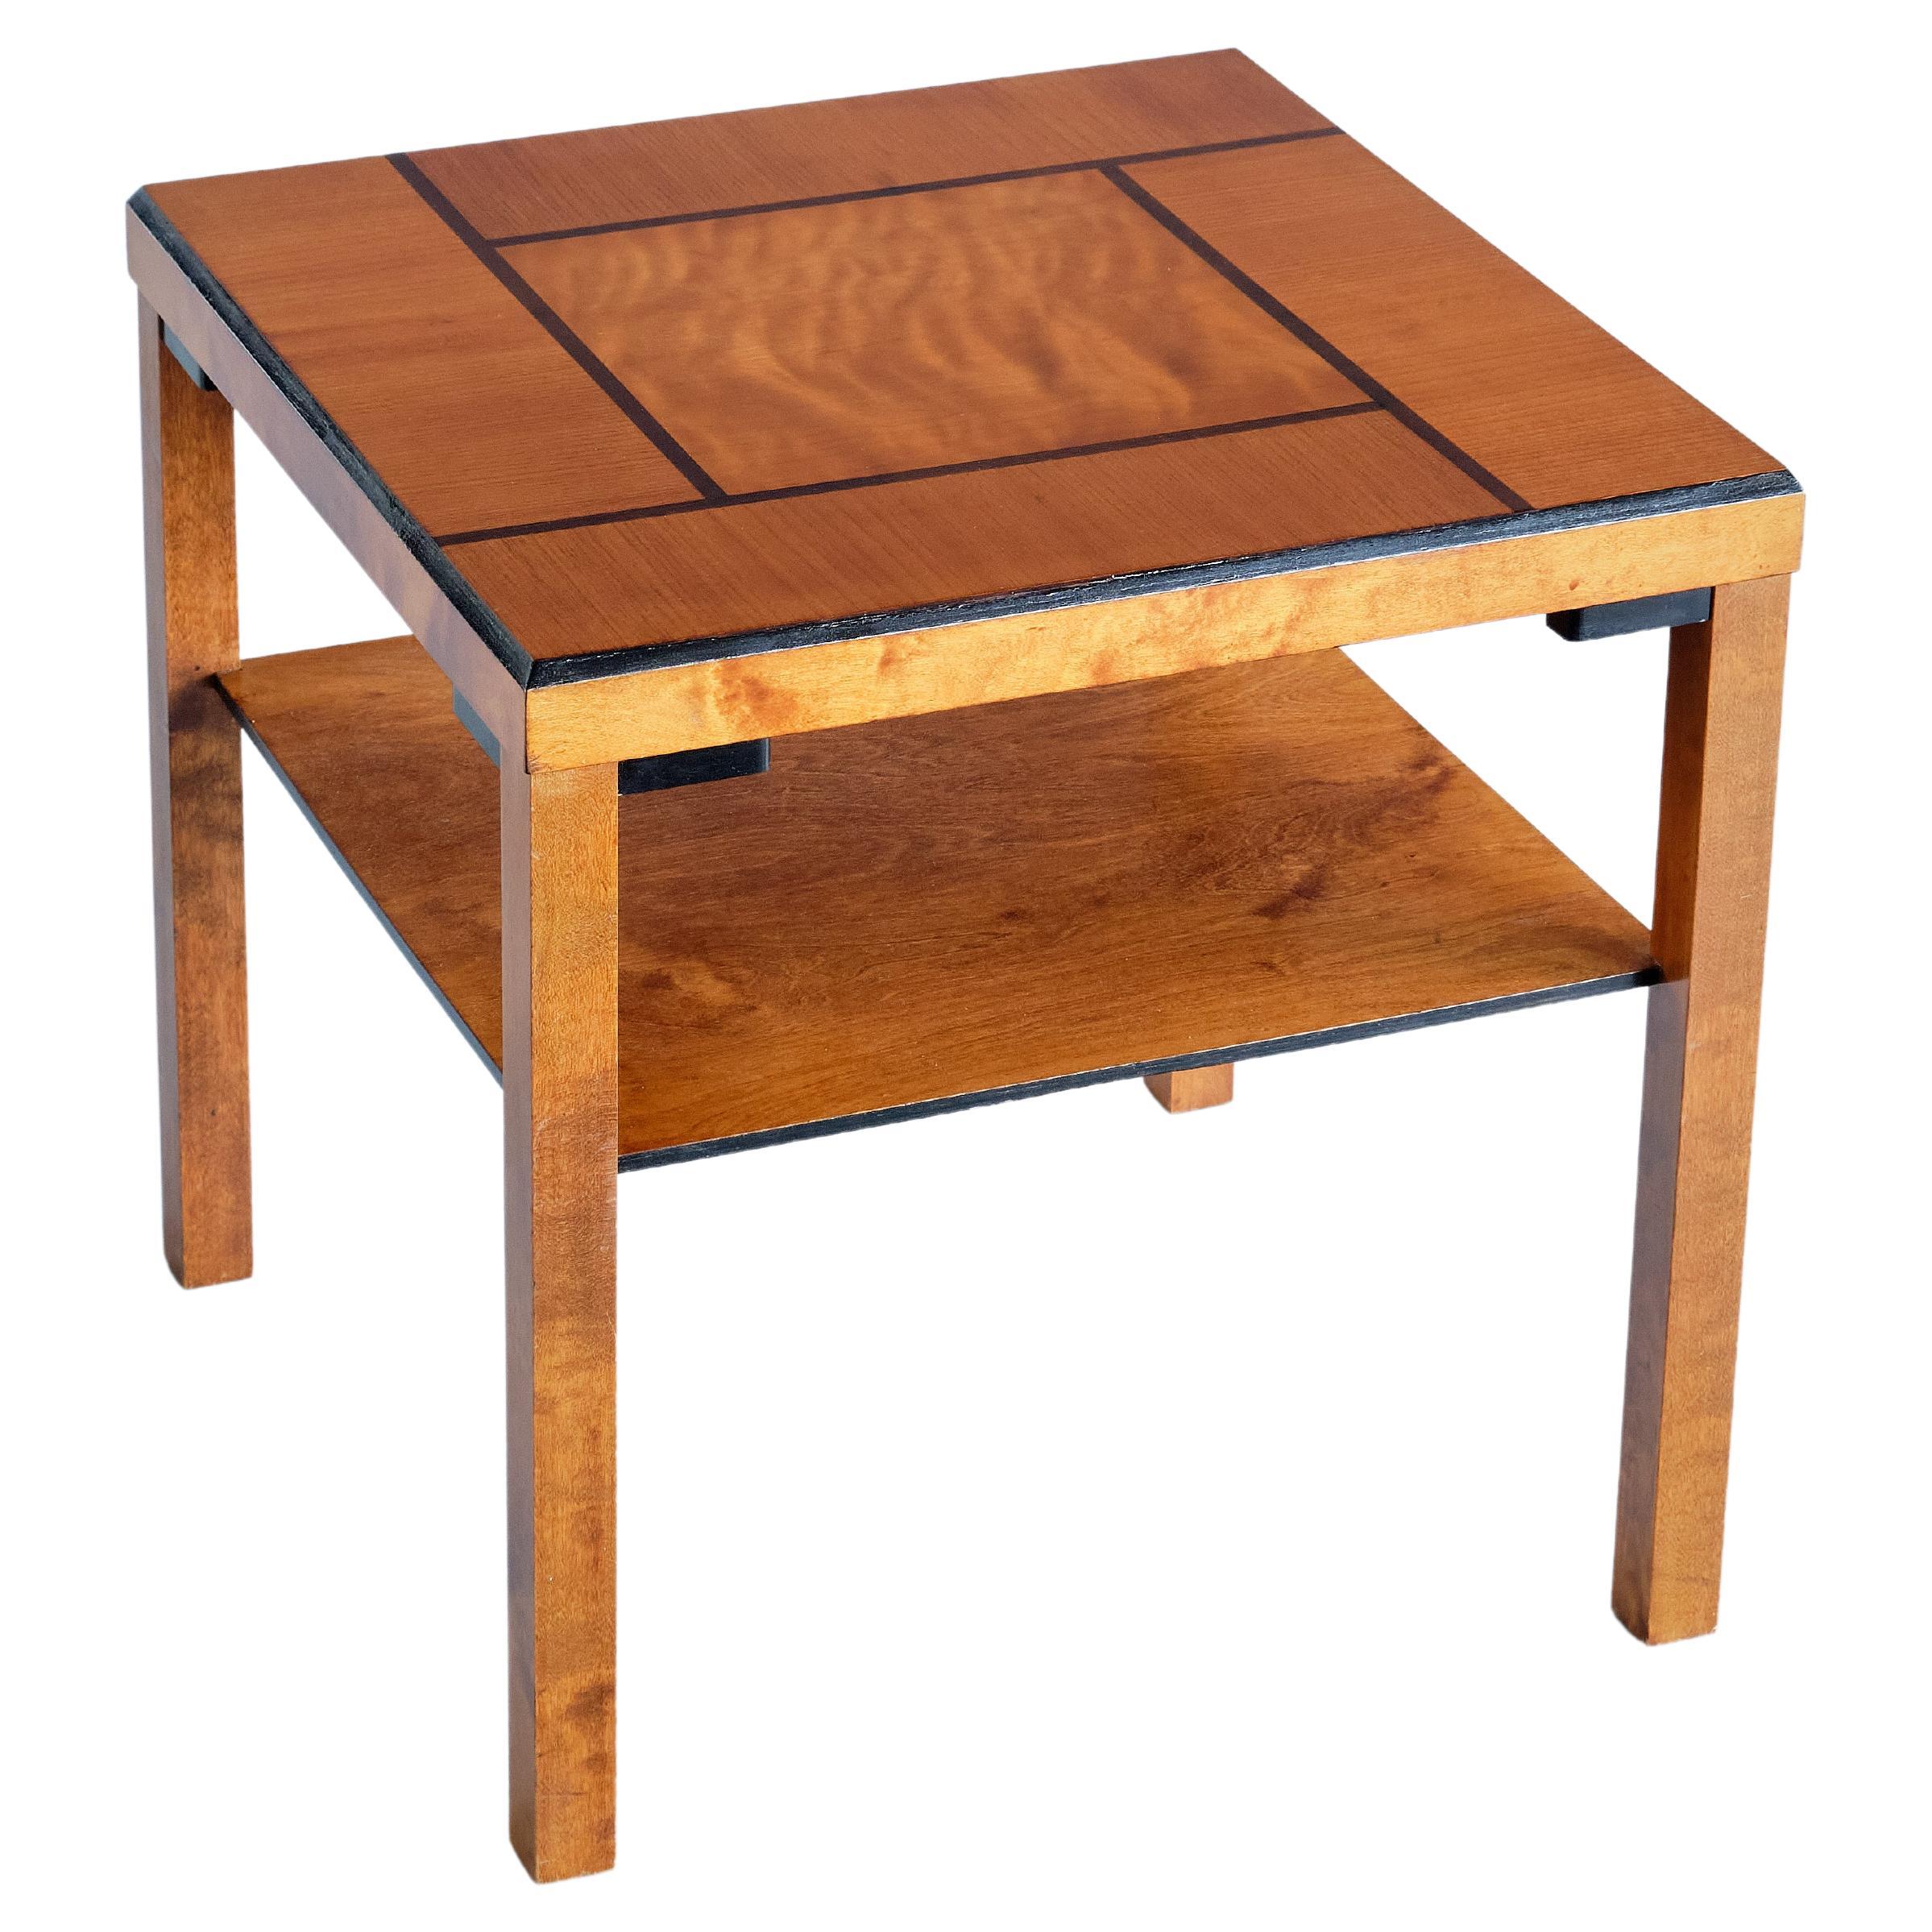 Swedish Grace Side Table in Elm and Birch Wood, Sweden, 1930s For Sale